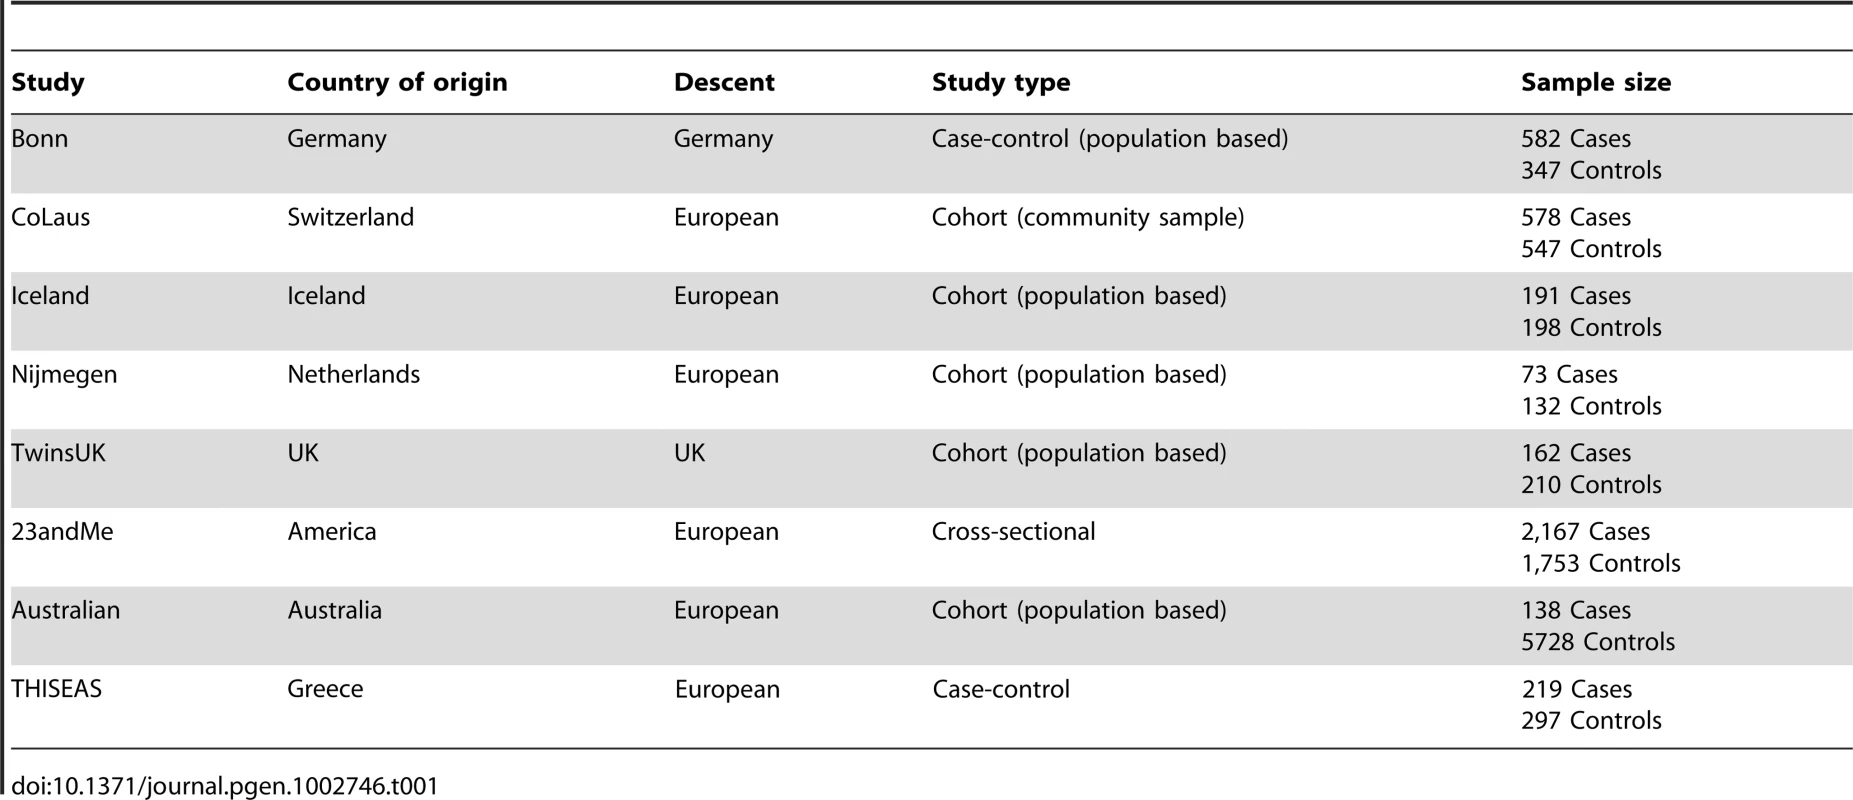 Demographic properties of the study subjects in participant studies.